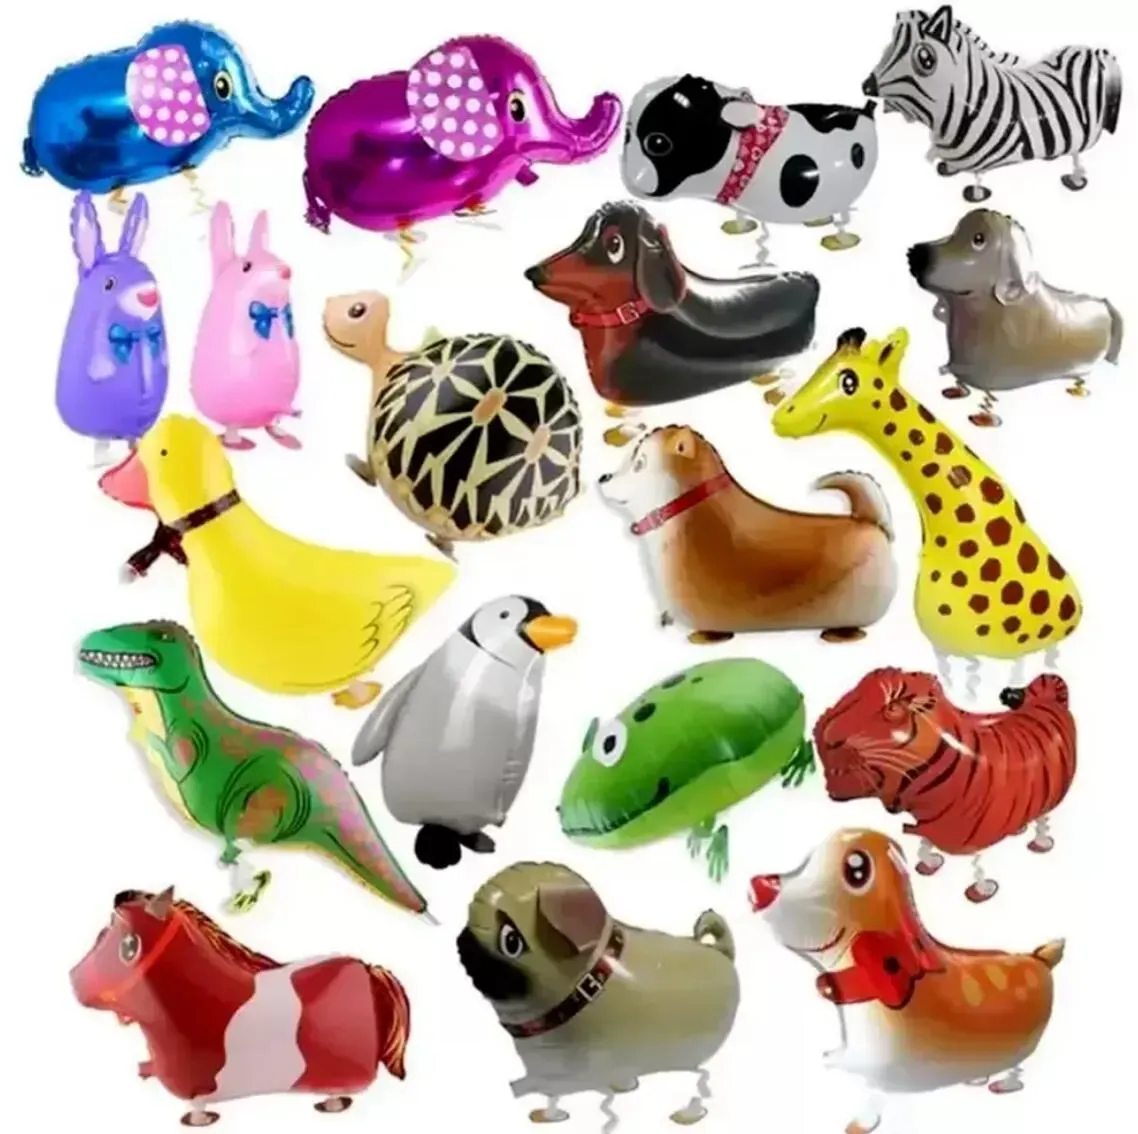 Decorations Cute Walking Animal Helium Balloons Cat Dog Dinosaur Air Ballons Birthday Decorations Kids Adult Event Party Decor Balloon GC1018A1